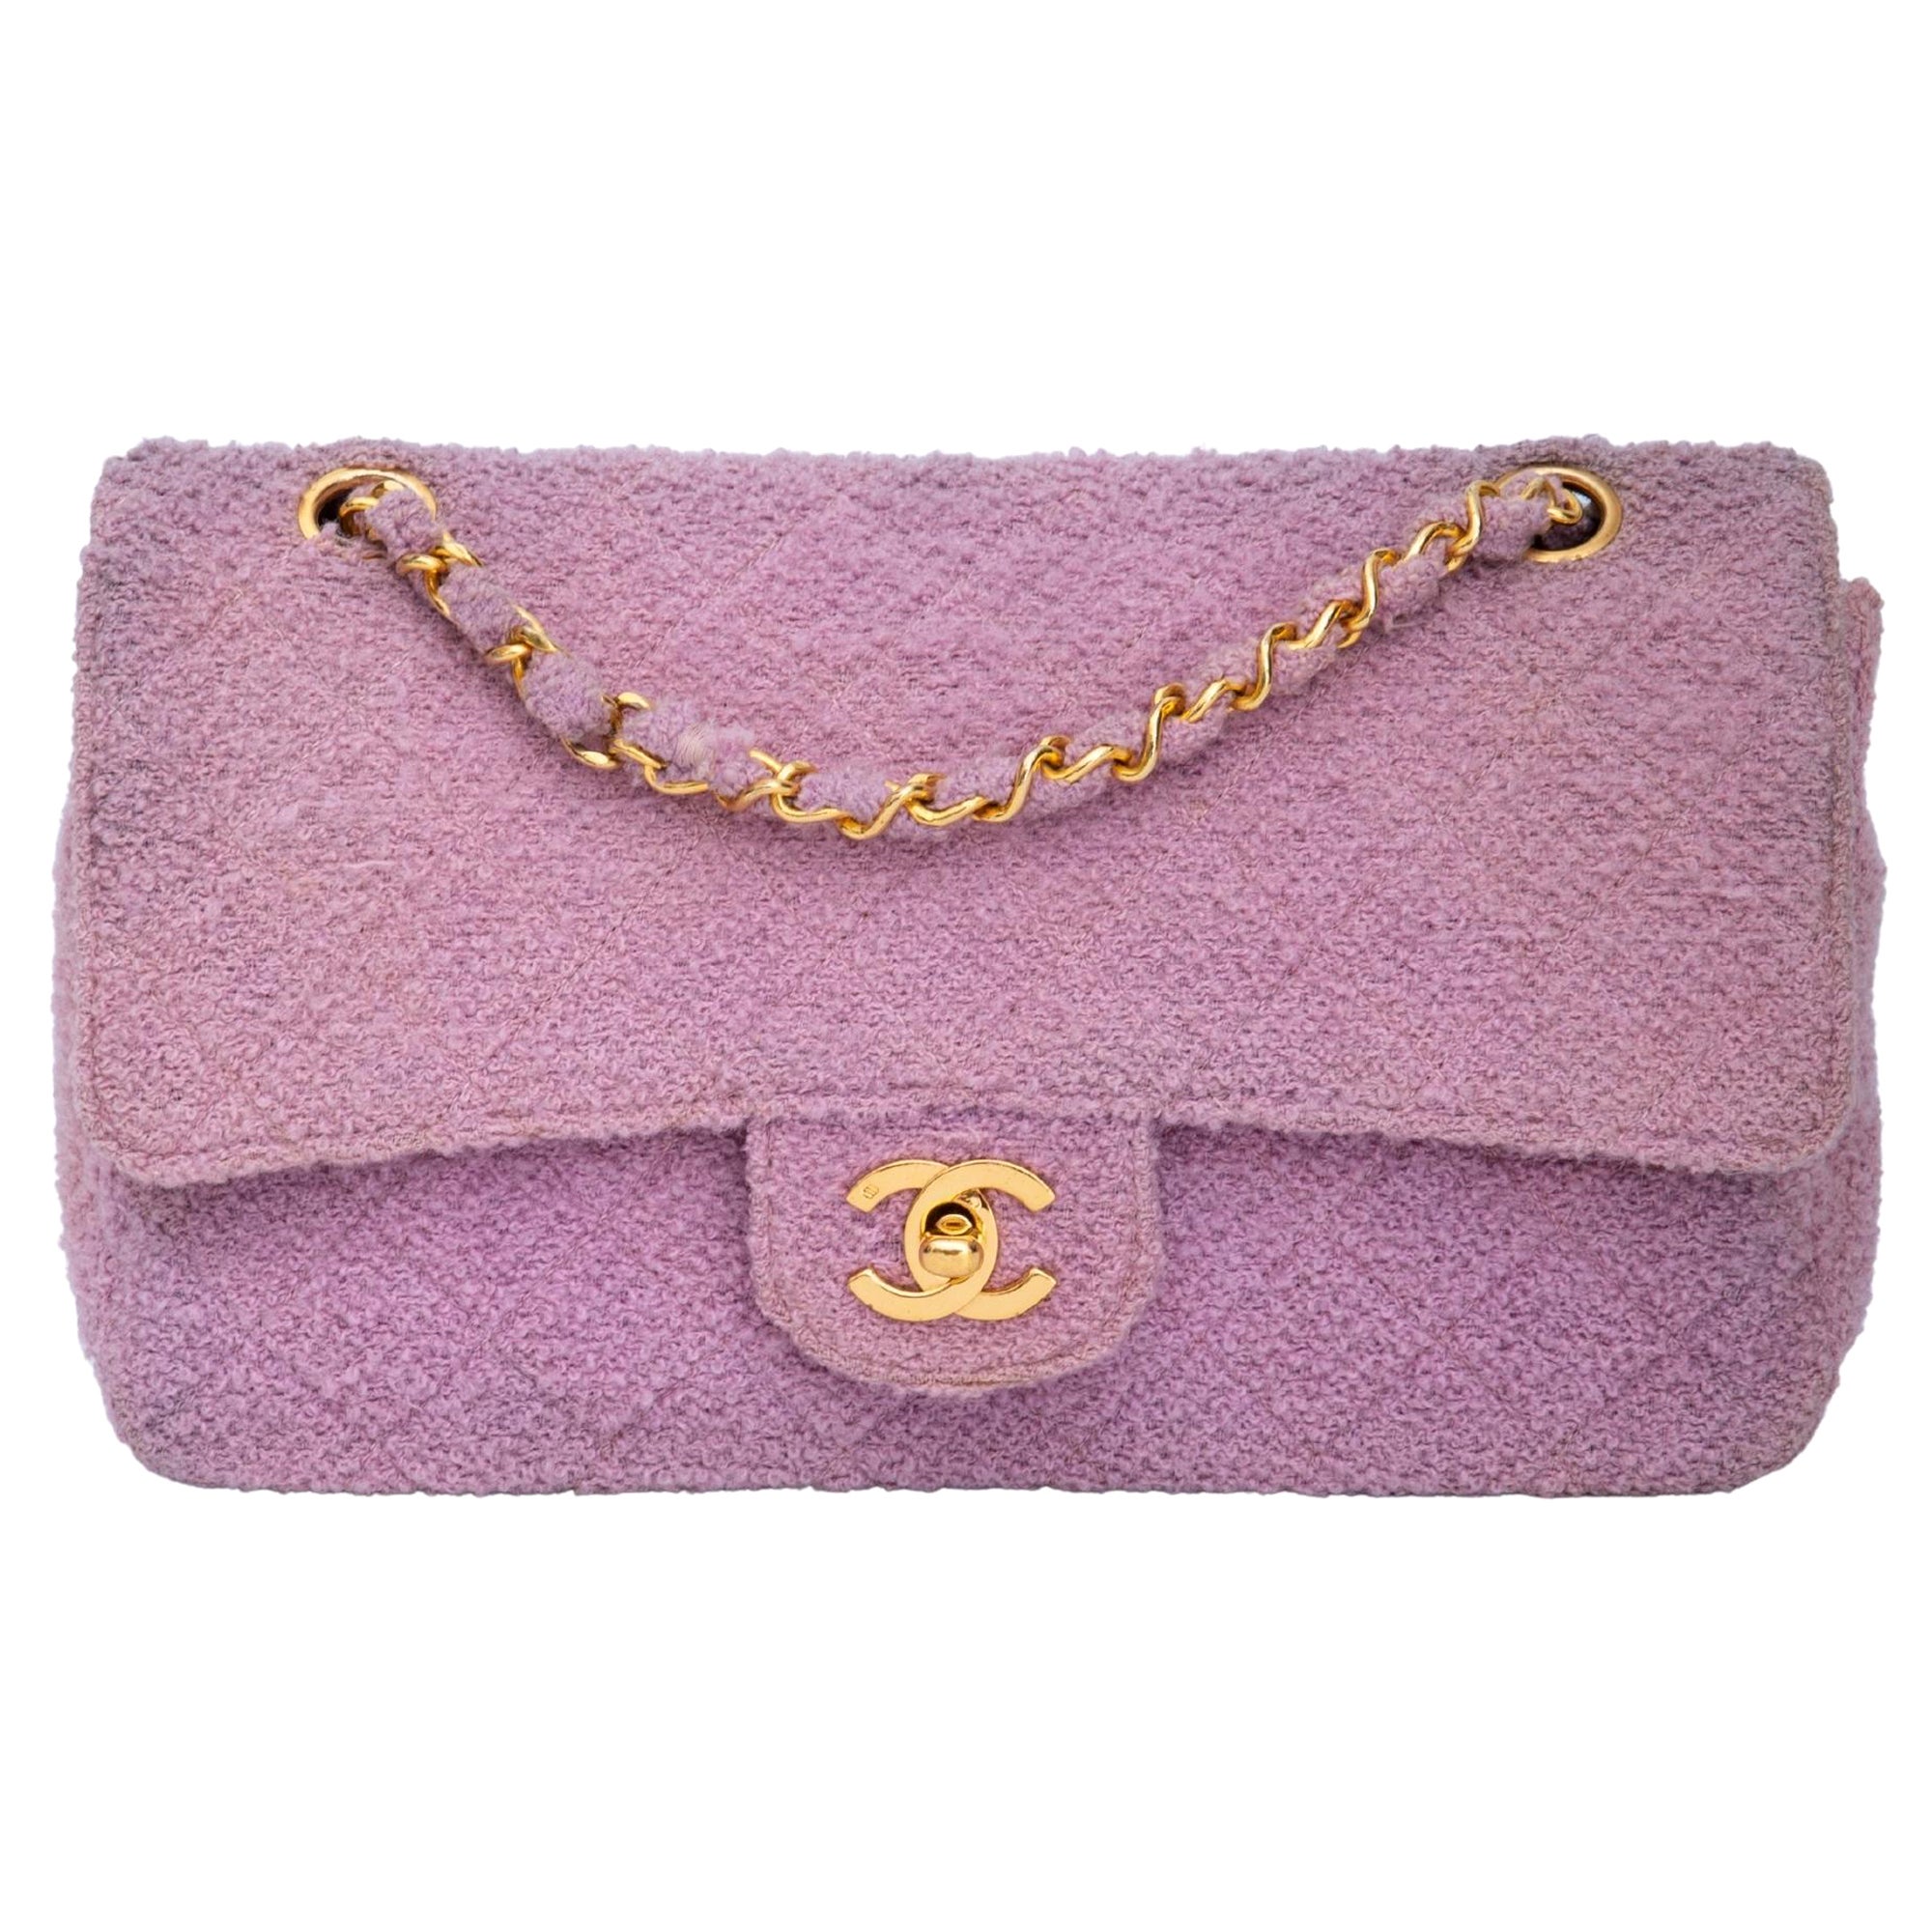 Chanel Vintage Small Pink Tweed Classic Single Flap Bag (2014)